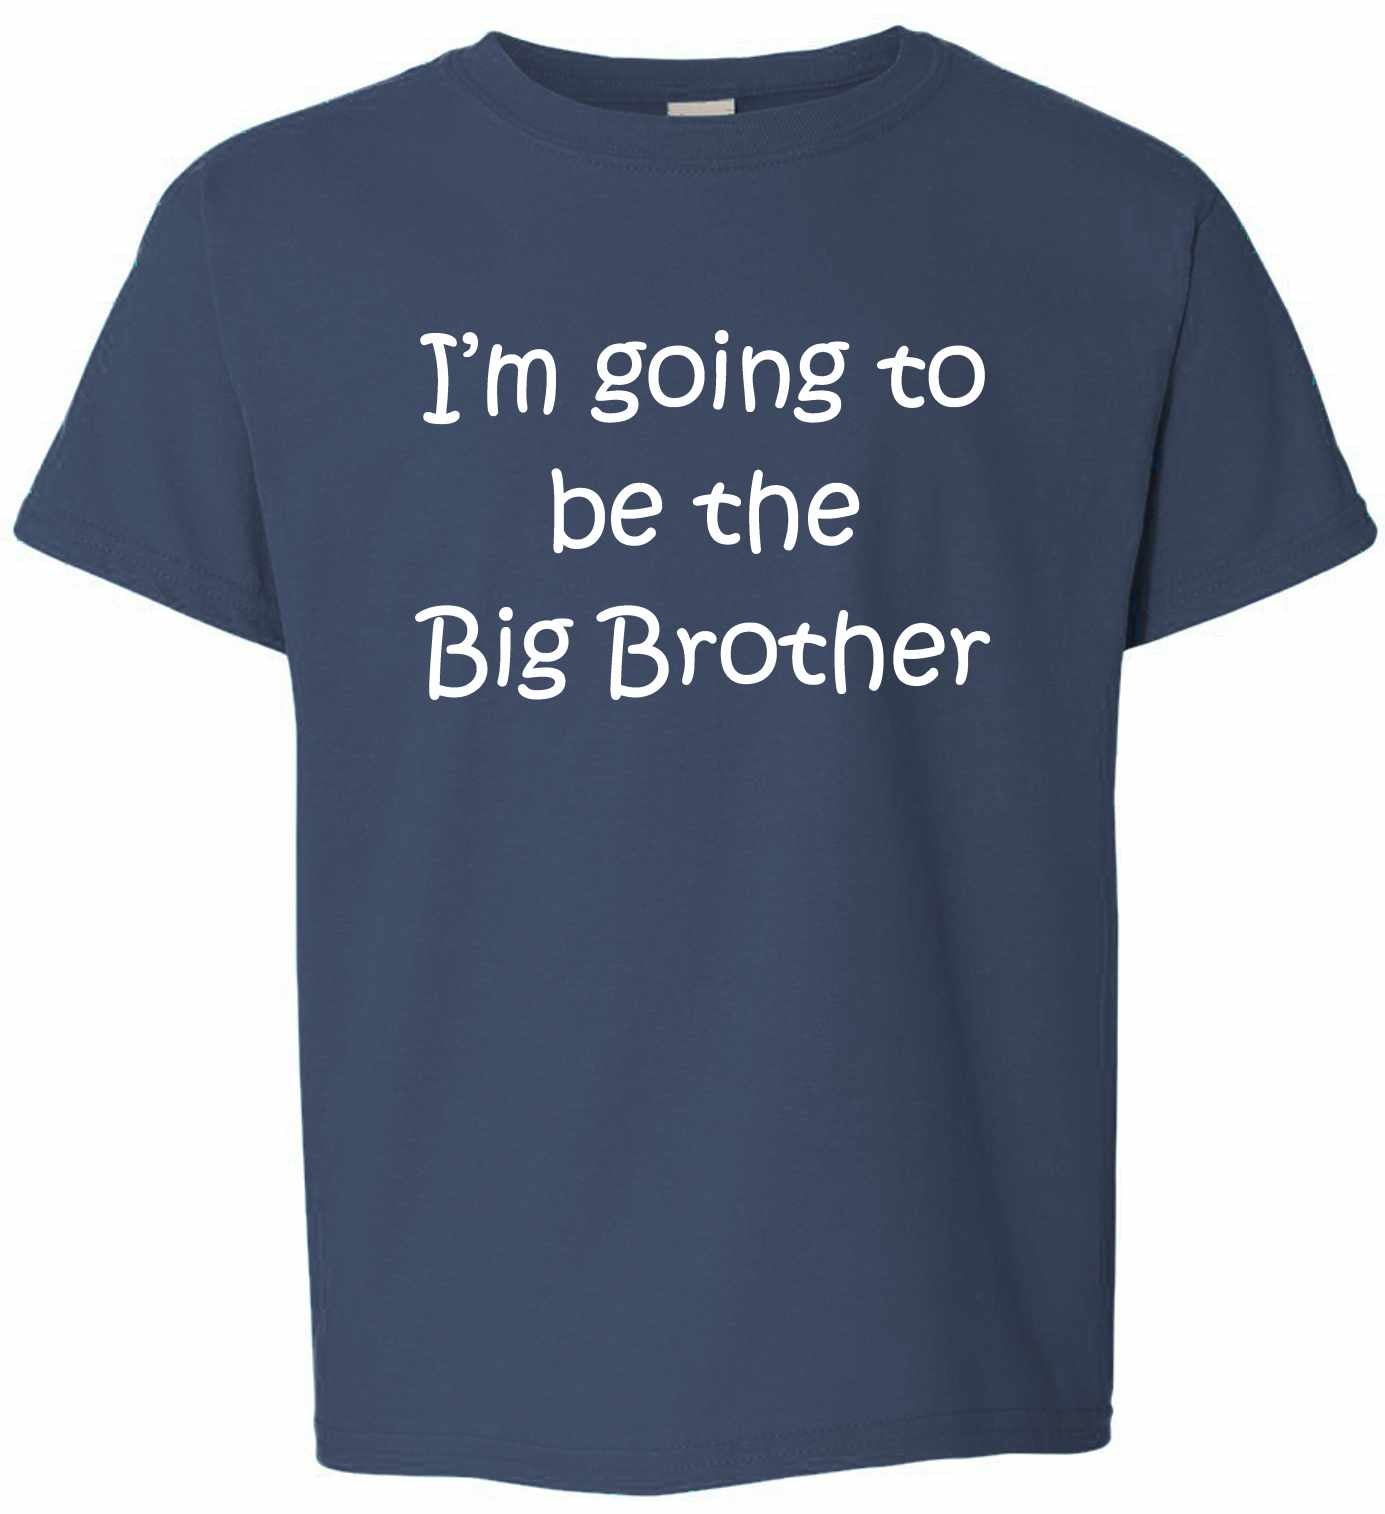 I'M GOING TO BE THE BIG BROTHER on Kids T-Shirt